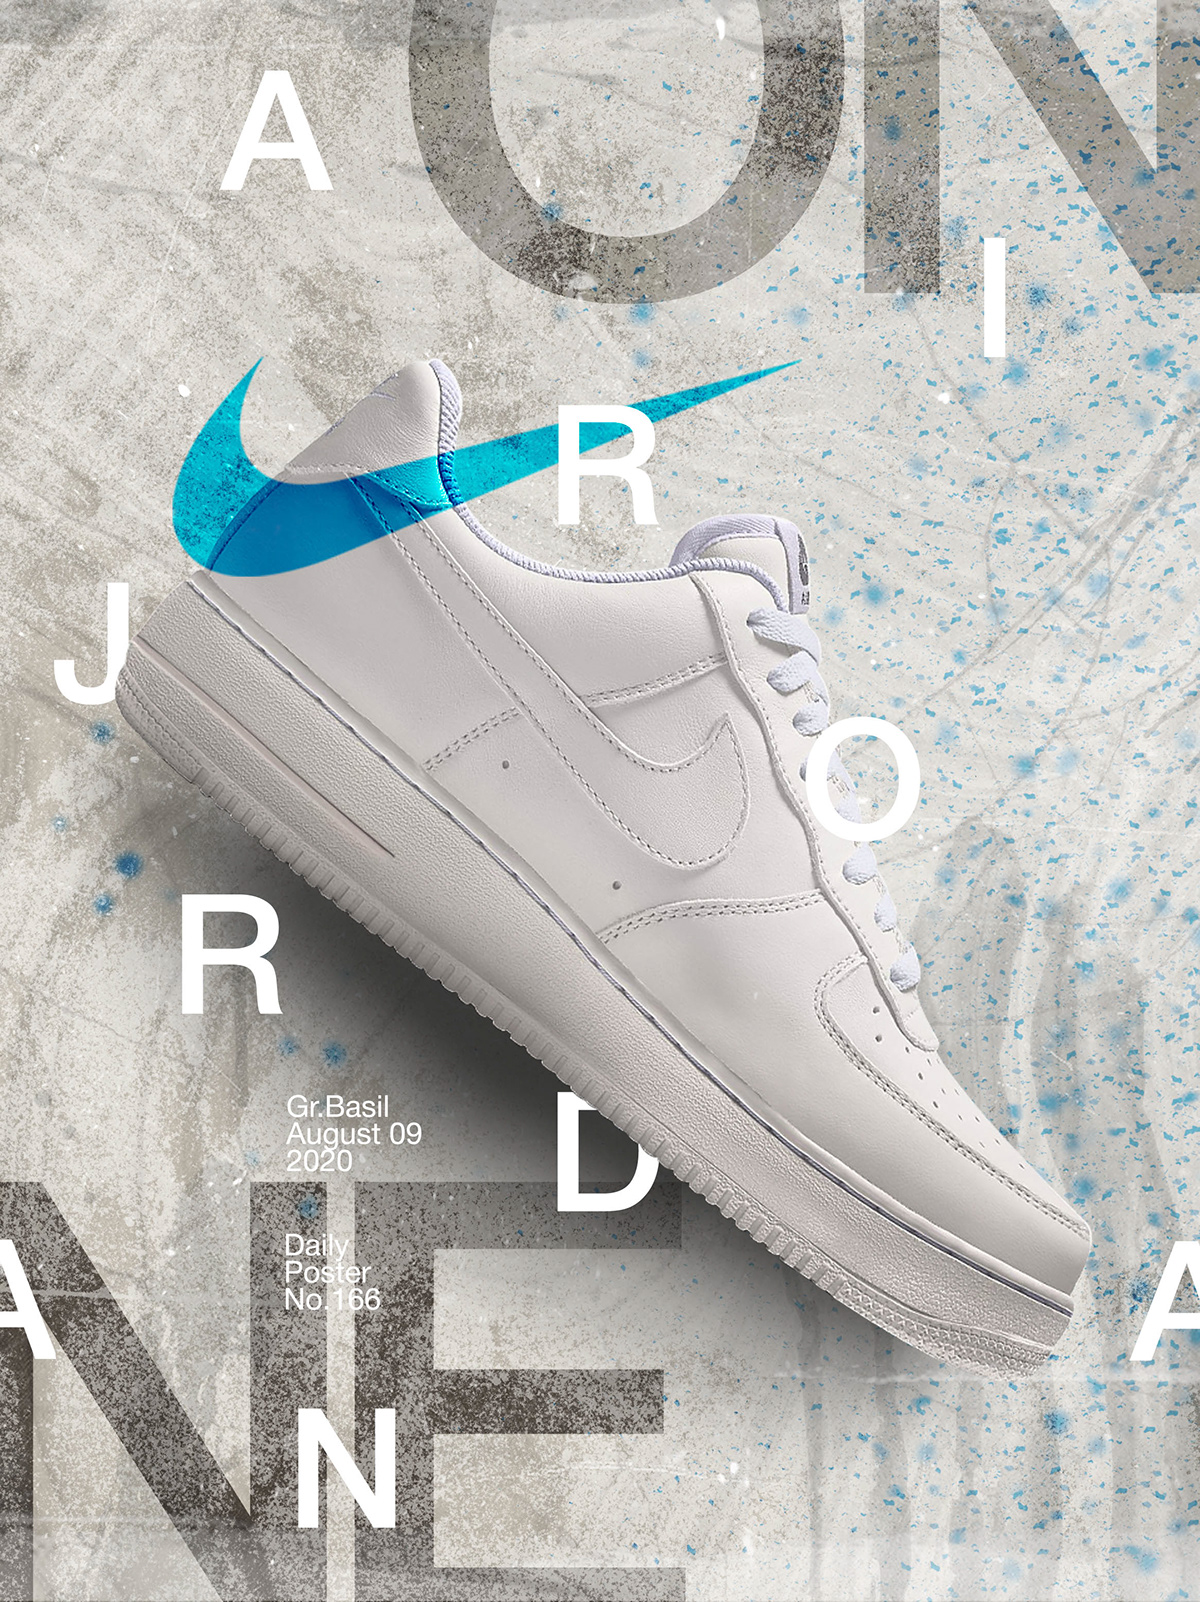 Nike air Force 1 poster